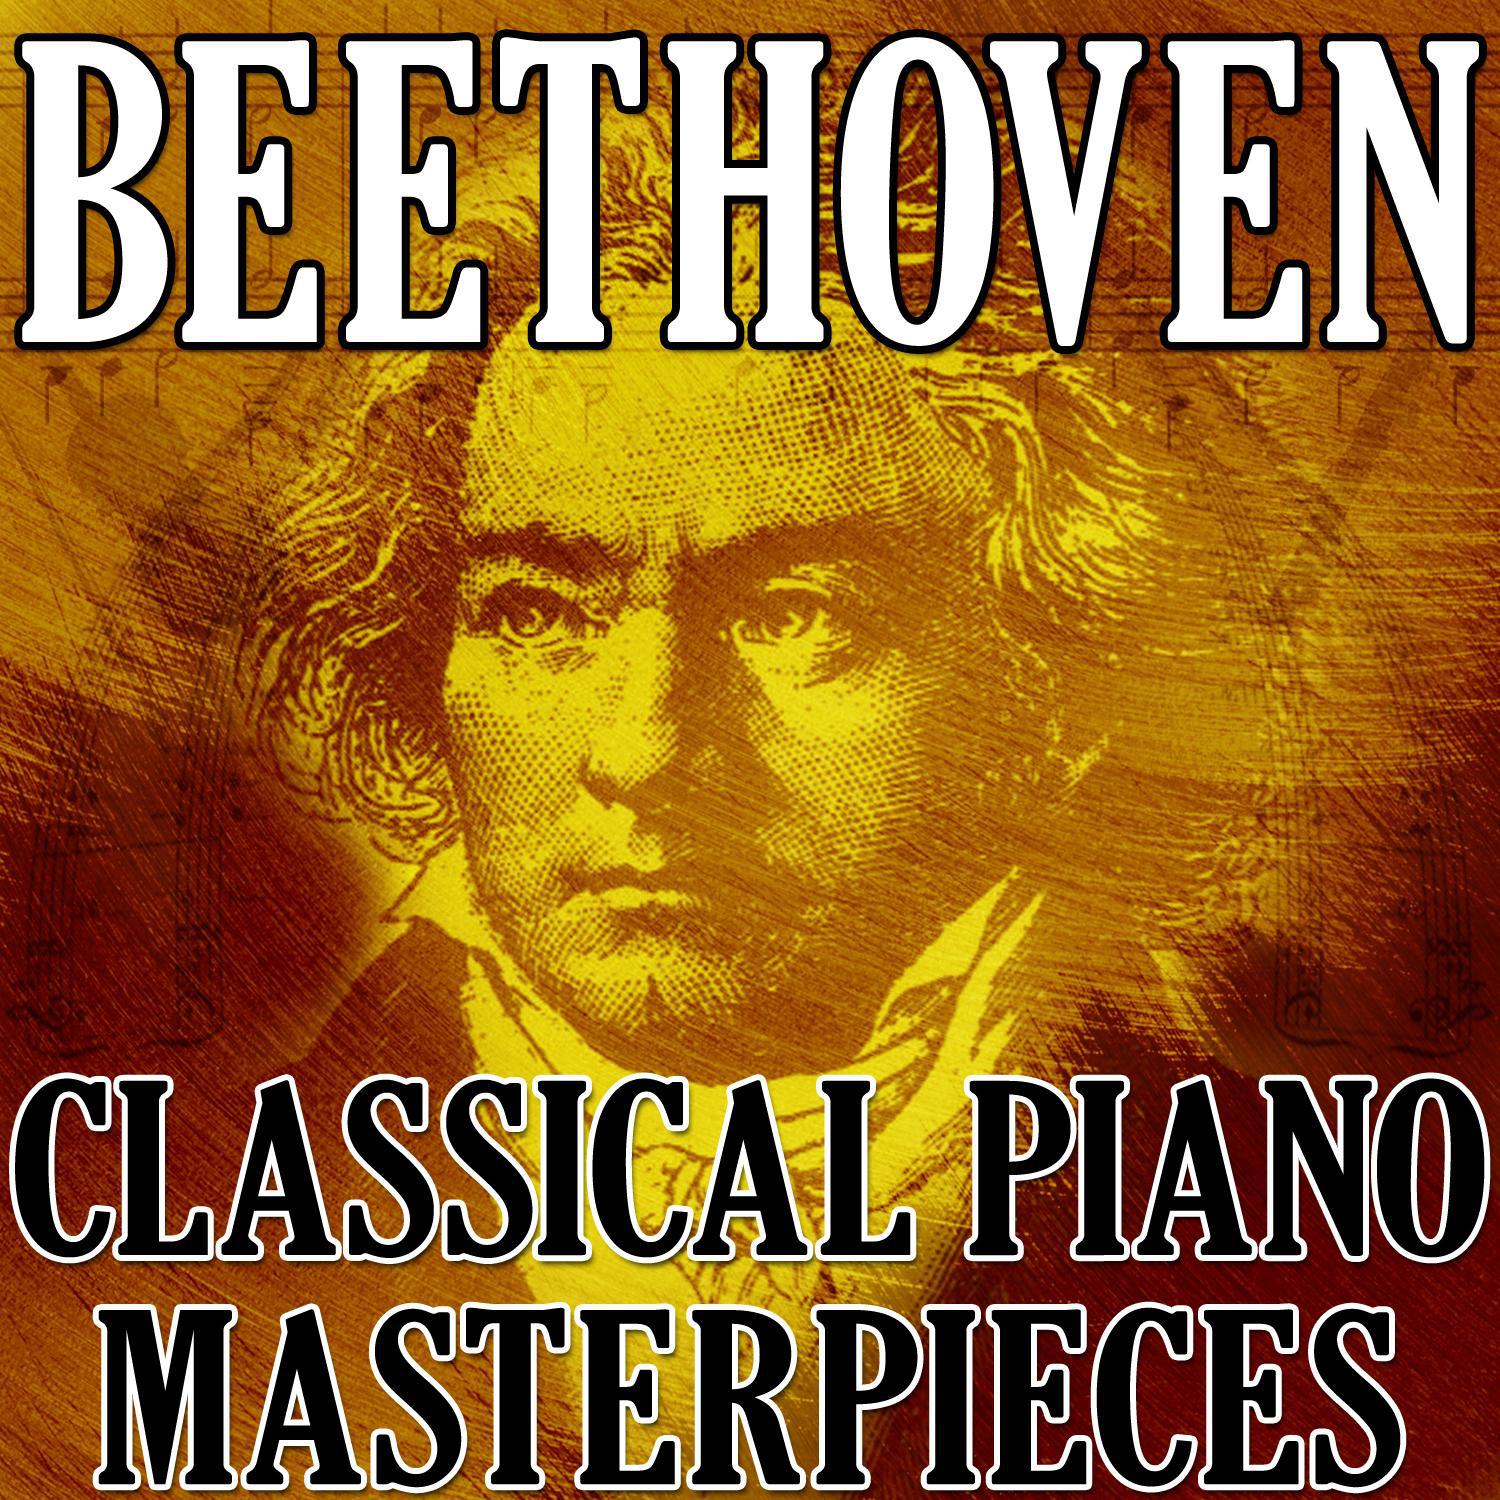 Beethoven (Classical Piano Masterpieces)专辑